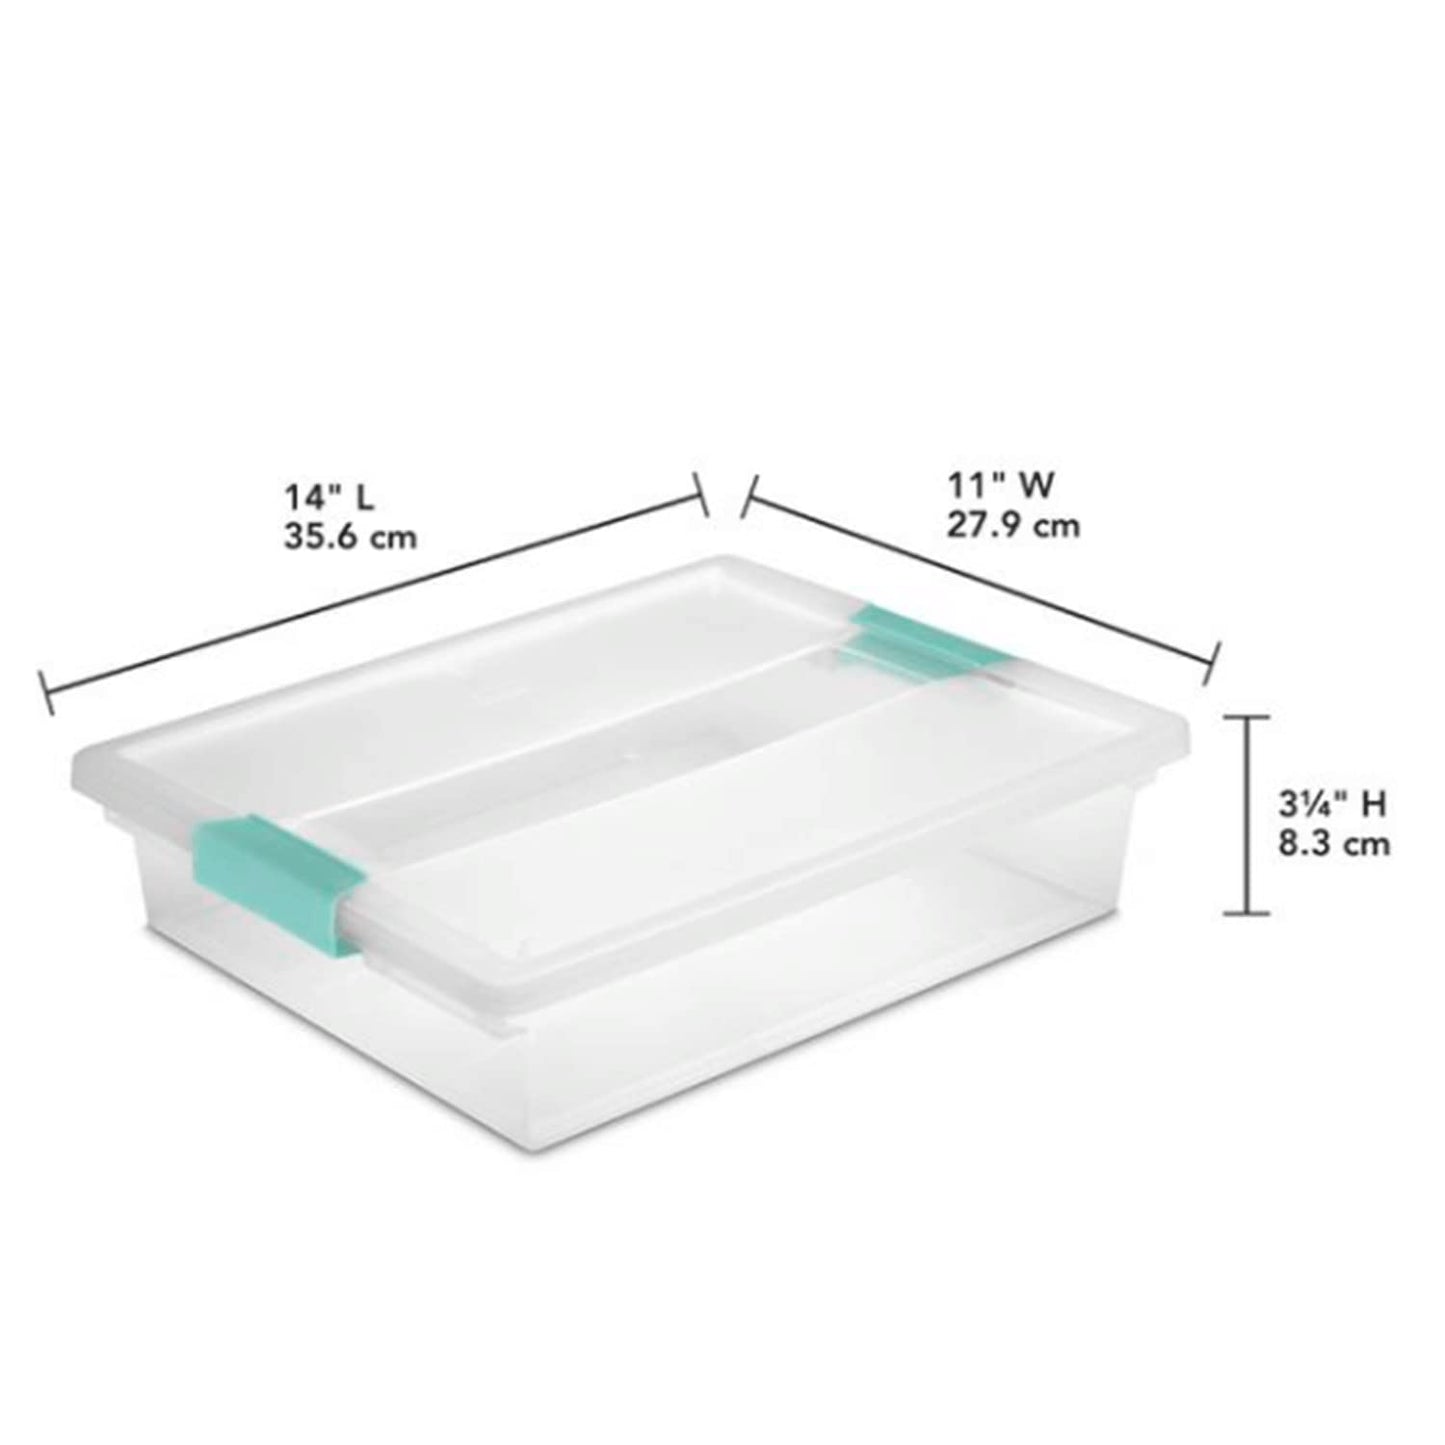 Sterilite Large Plastic File Clip Box Office Storage Tote Container with Lid